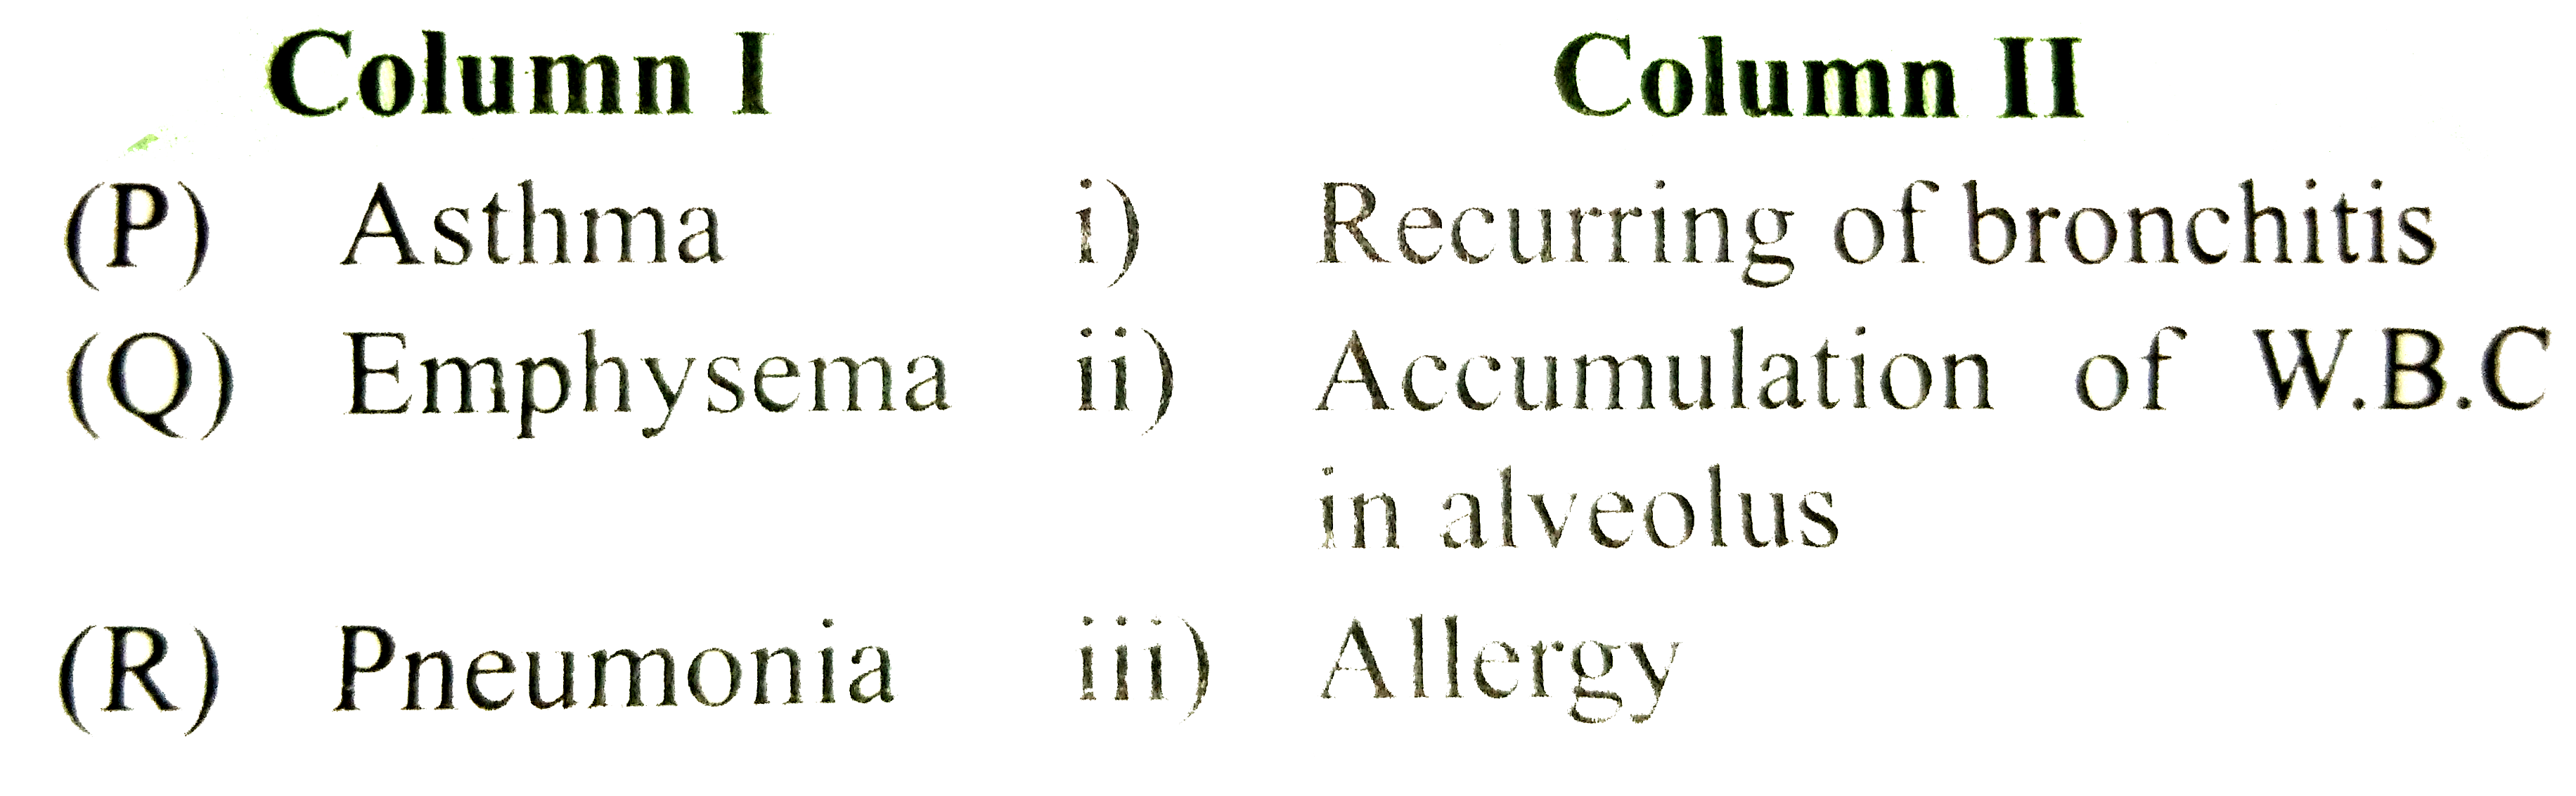 Column I represents diseases and column IIrepresents their symptoms. Choose the correctlypaired option.